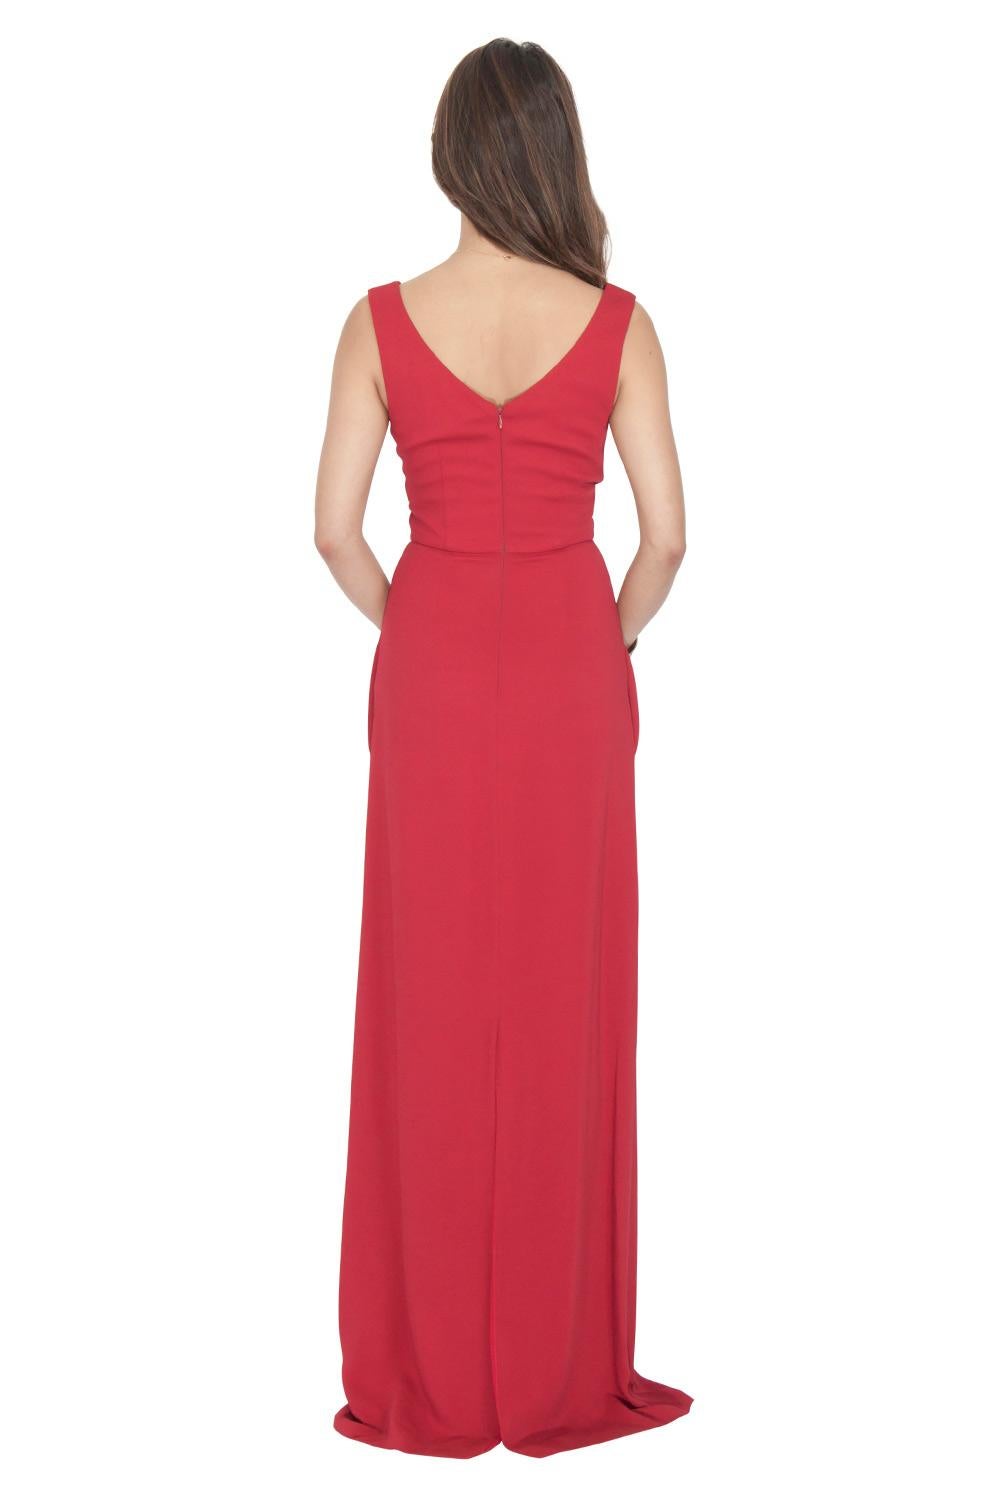 Designed with a criss-cross pleated bodice, this sleeveless gown comes in red color. Walk like a diva in this brilliant creation tailored from a fine fabric blend. Derek Lam has precisely made this gown to complement your personality in the most